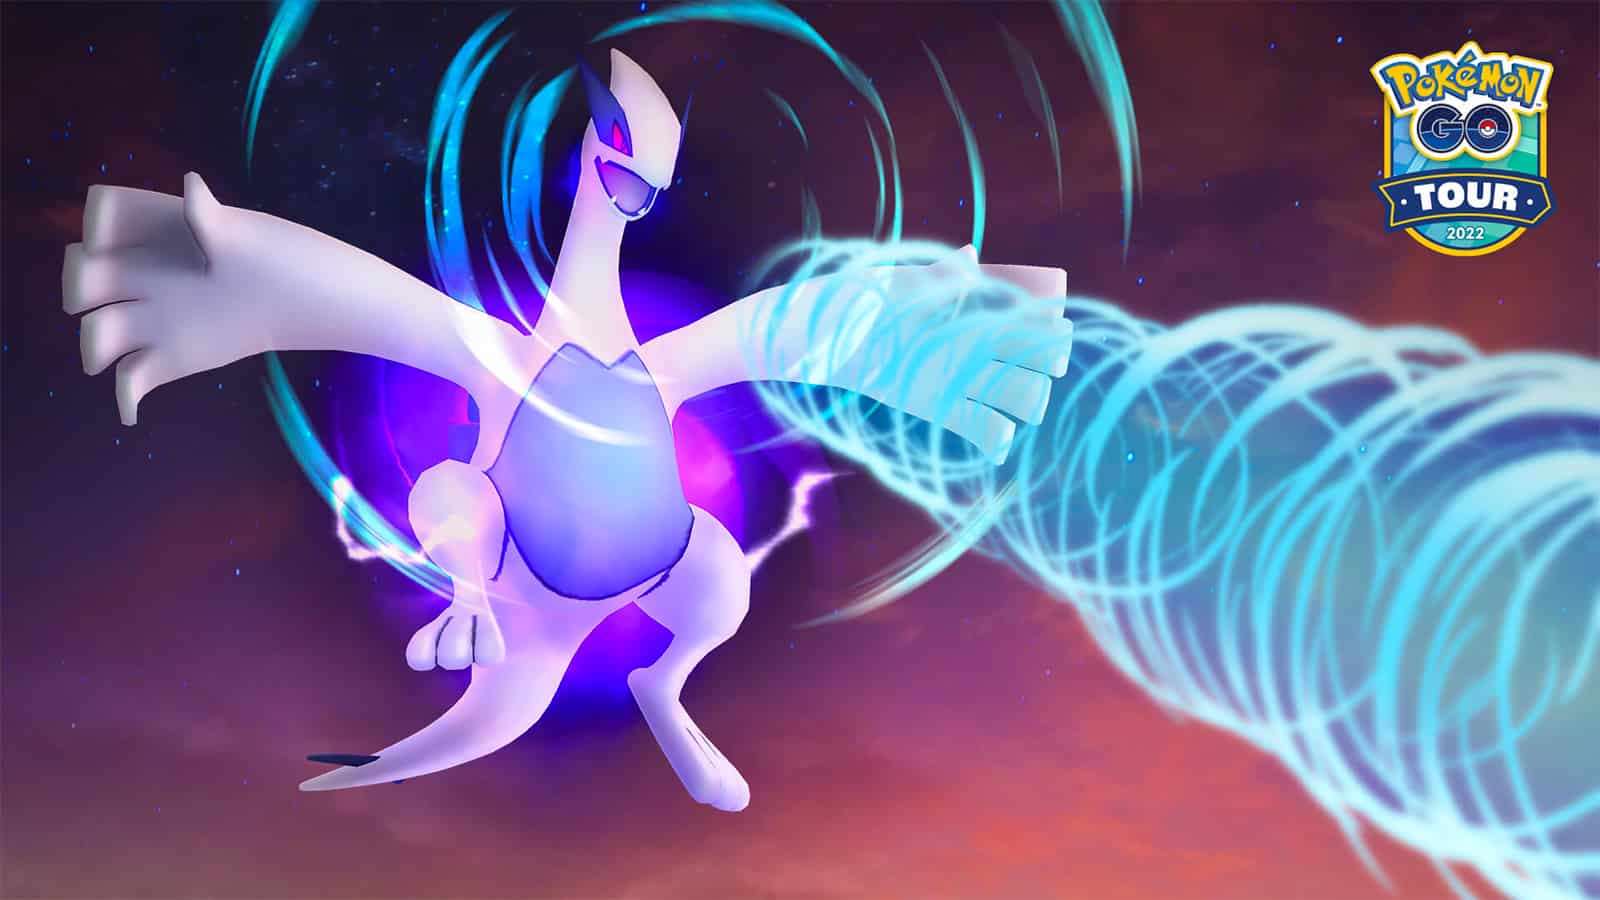 Apex Shadow Lugia appearing in the Pokemon Go Masterwork Research